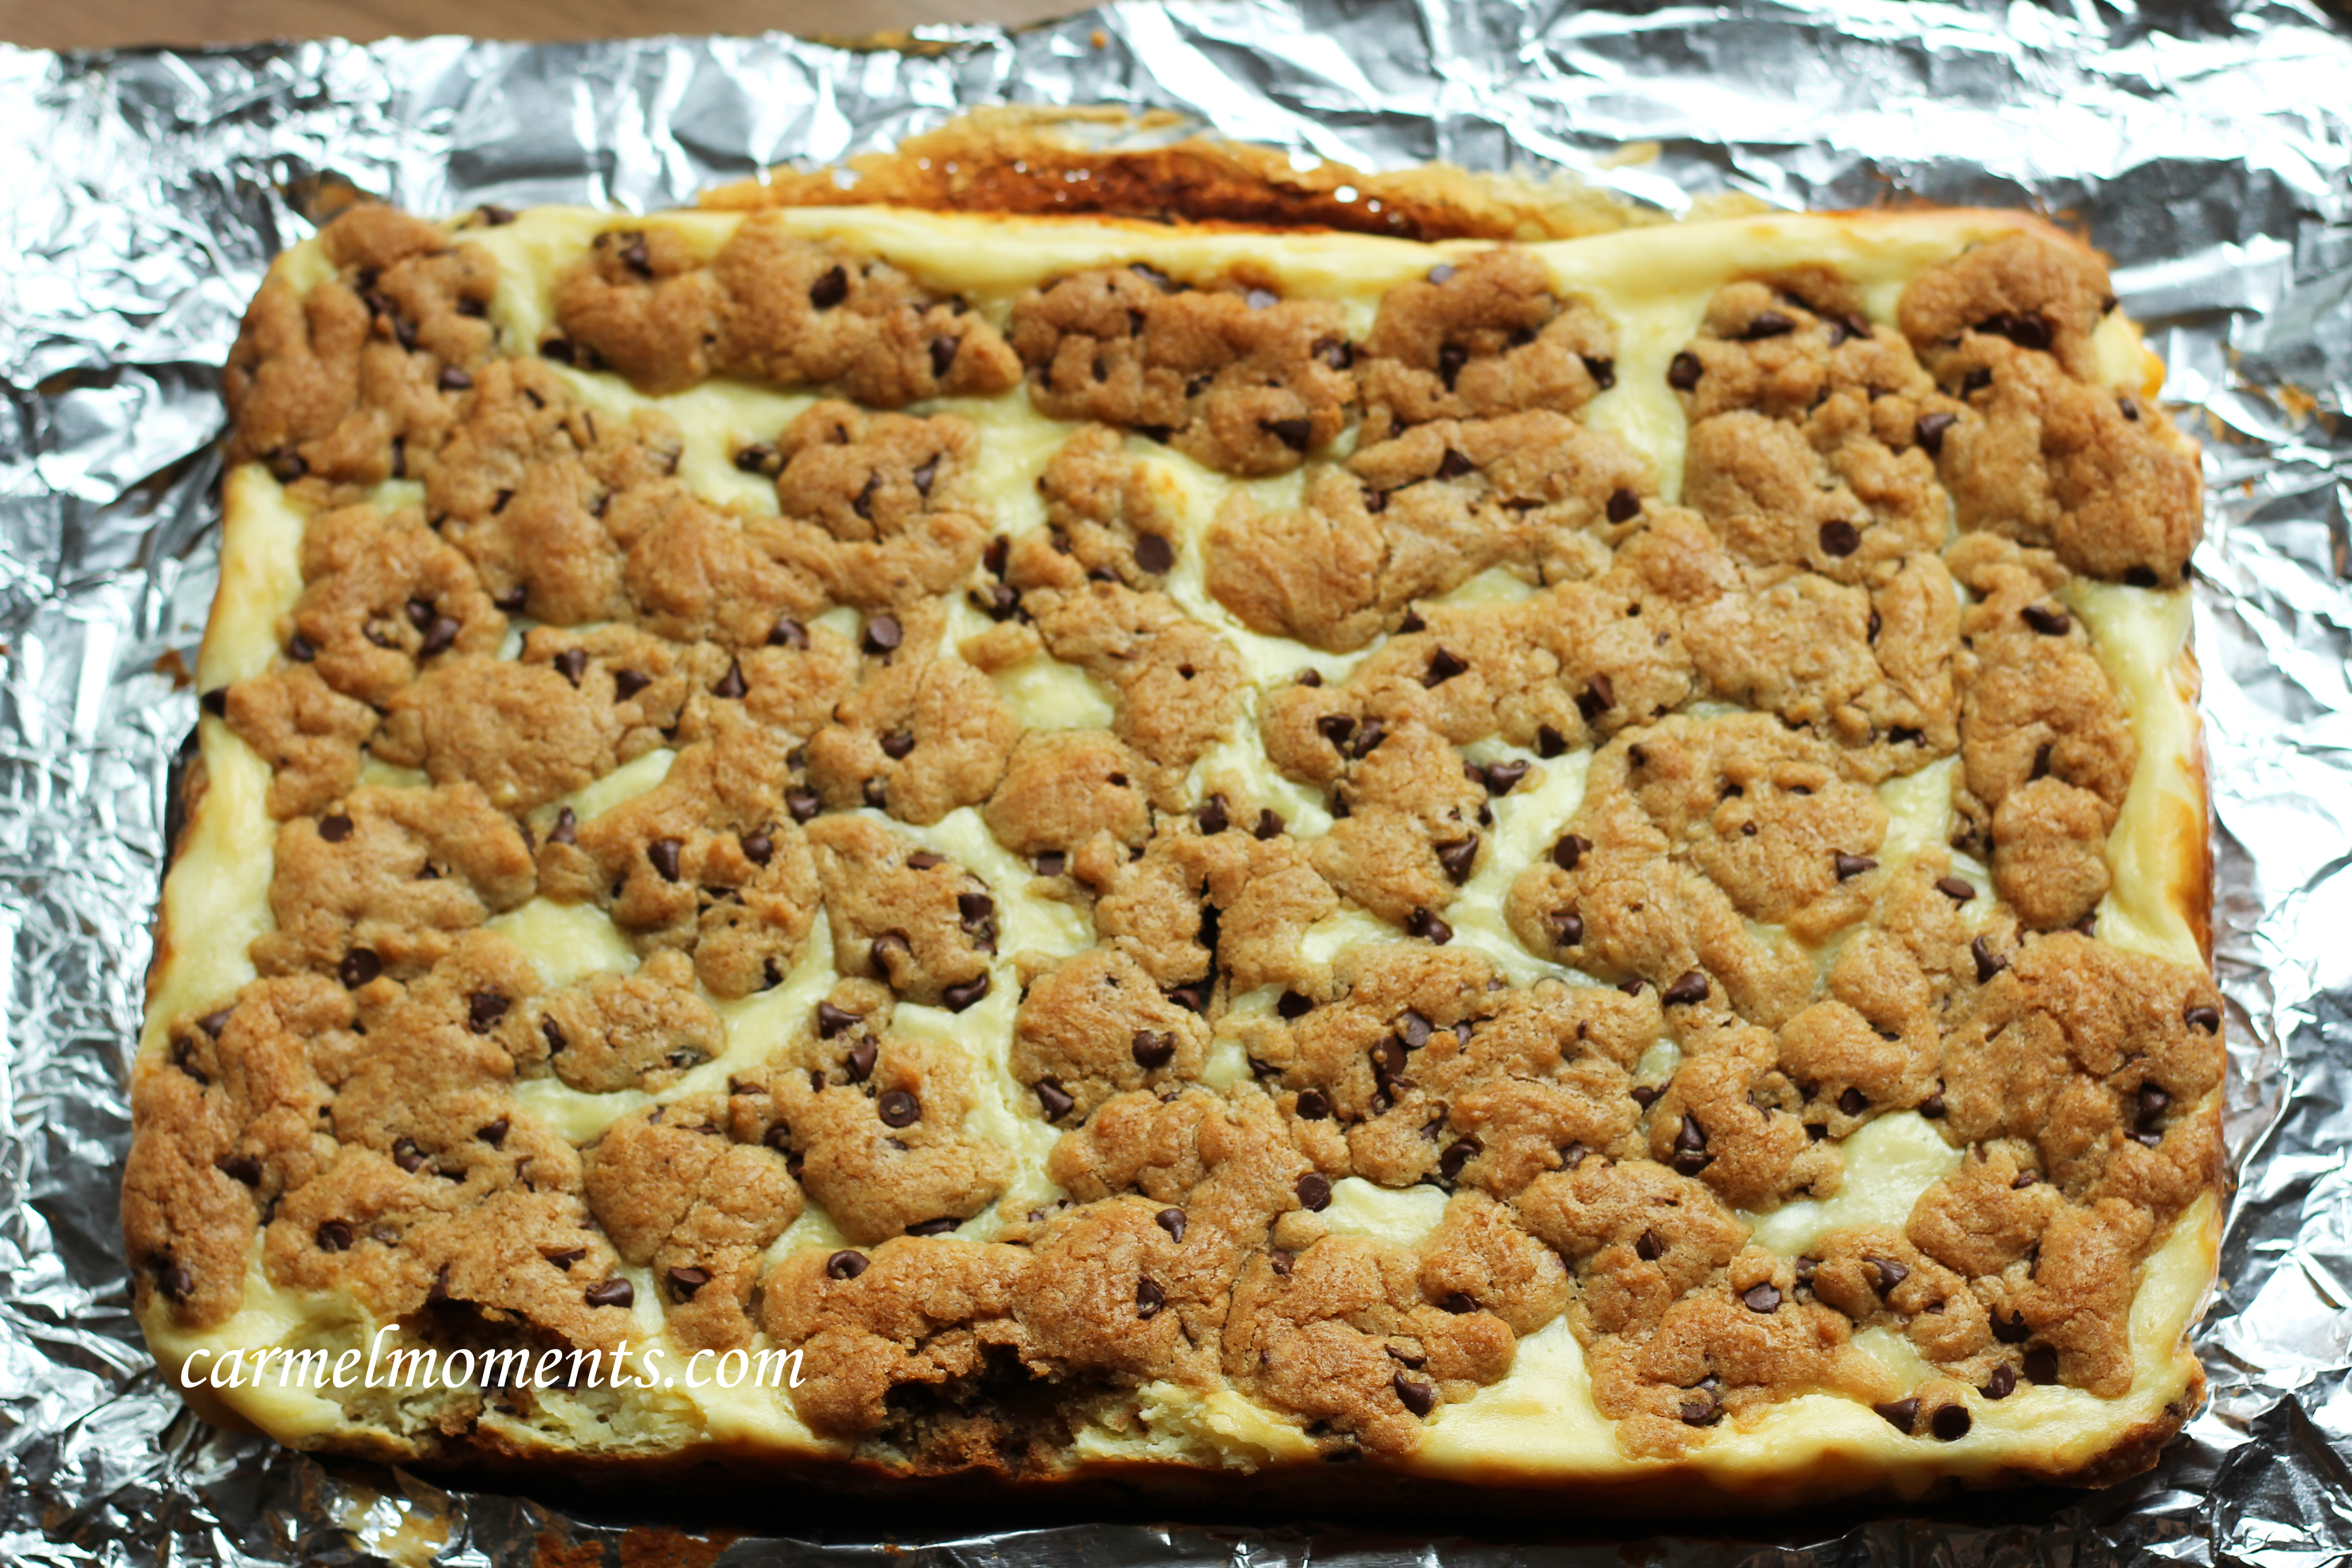 https://gatherforbread.com/wp-content/uploads/2013/06/cheese-chocolate-chip-bars-2.jpg